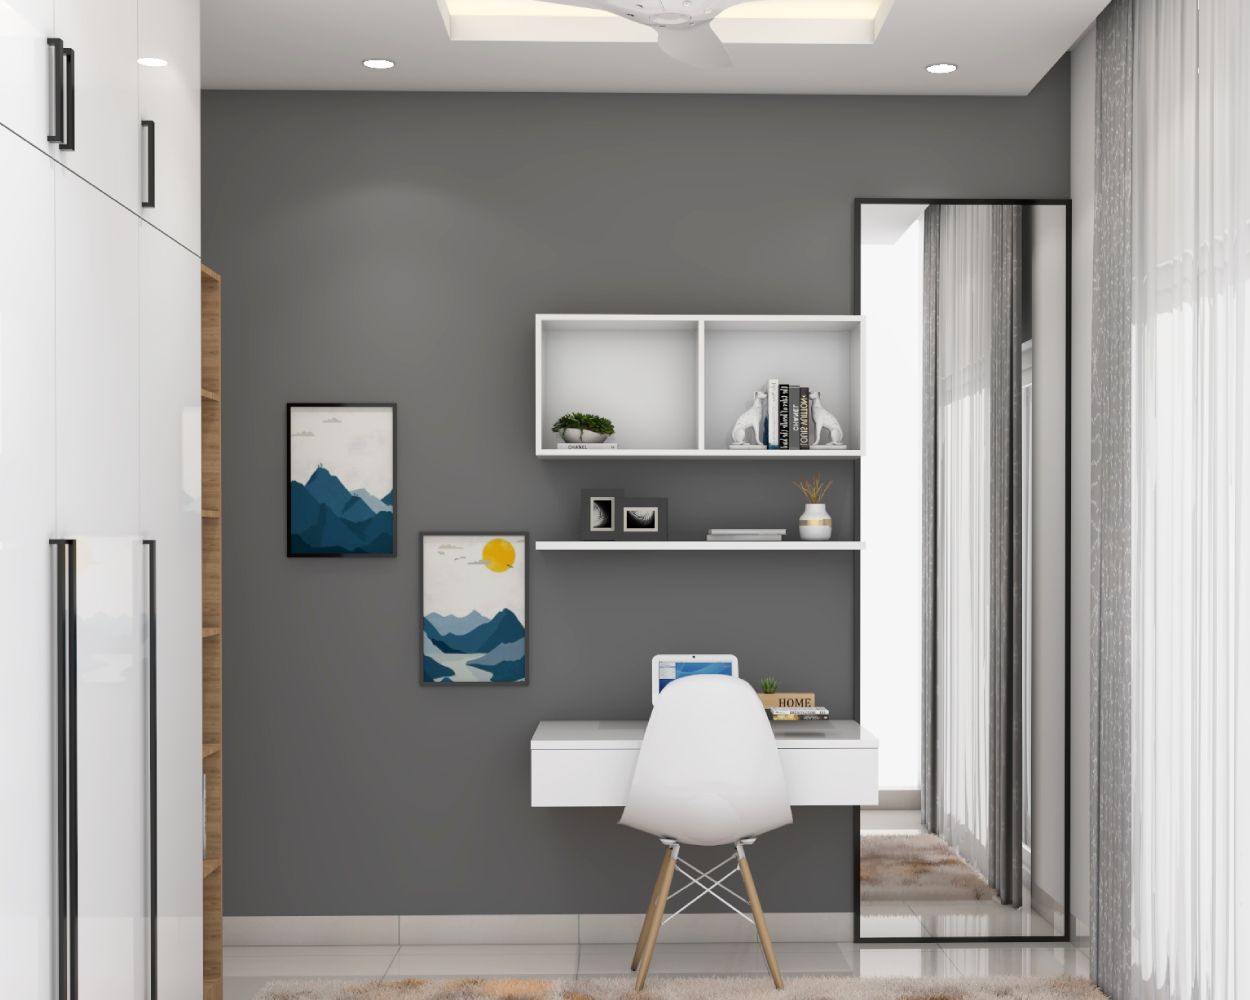 Modern Frosty White Study Room Design With Grey Painted Wall